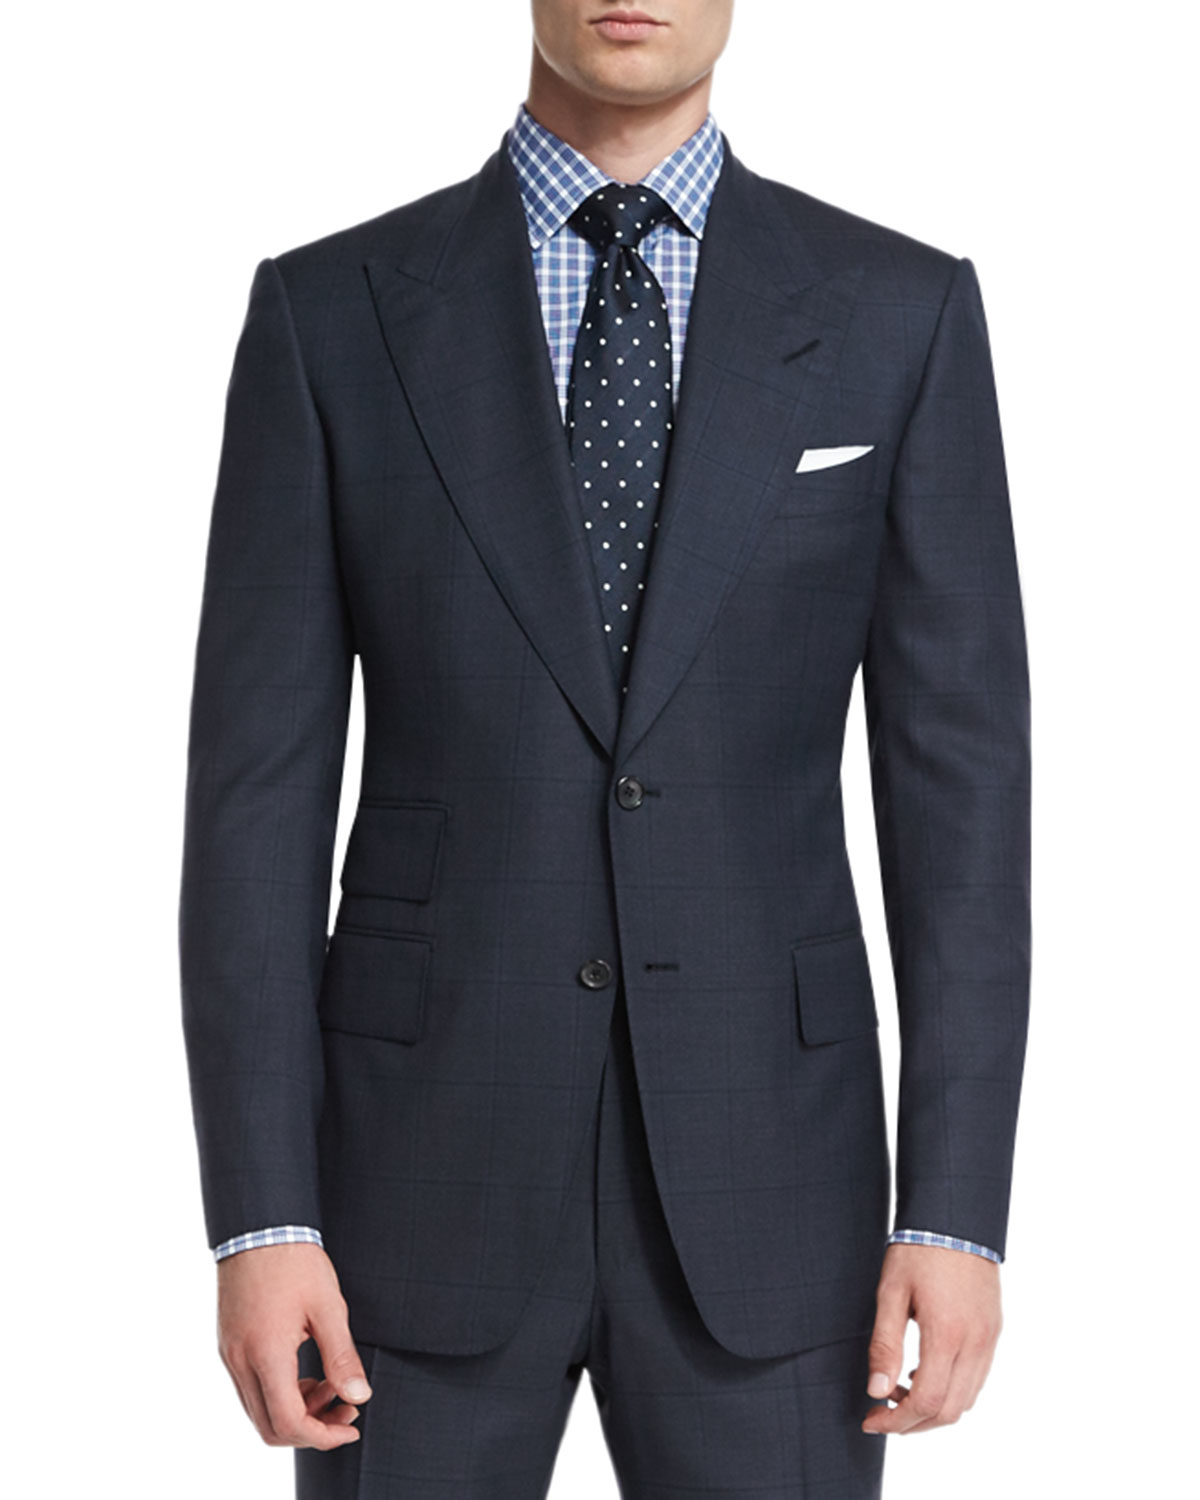 Lyst - Tom Ford Windsor Plaid Two-Piece Wool Suit in Black for Men